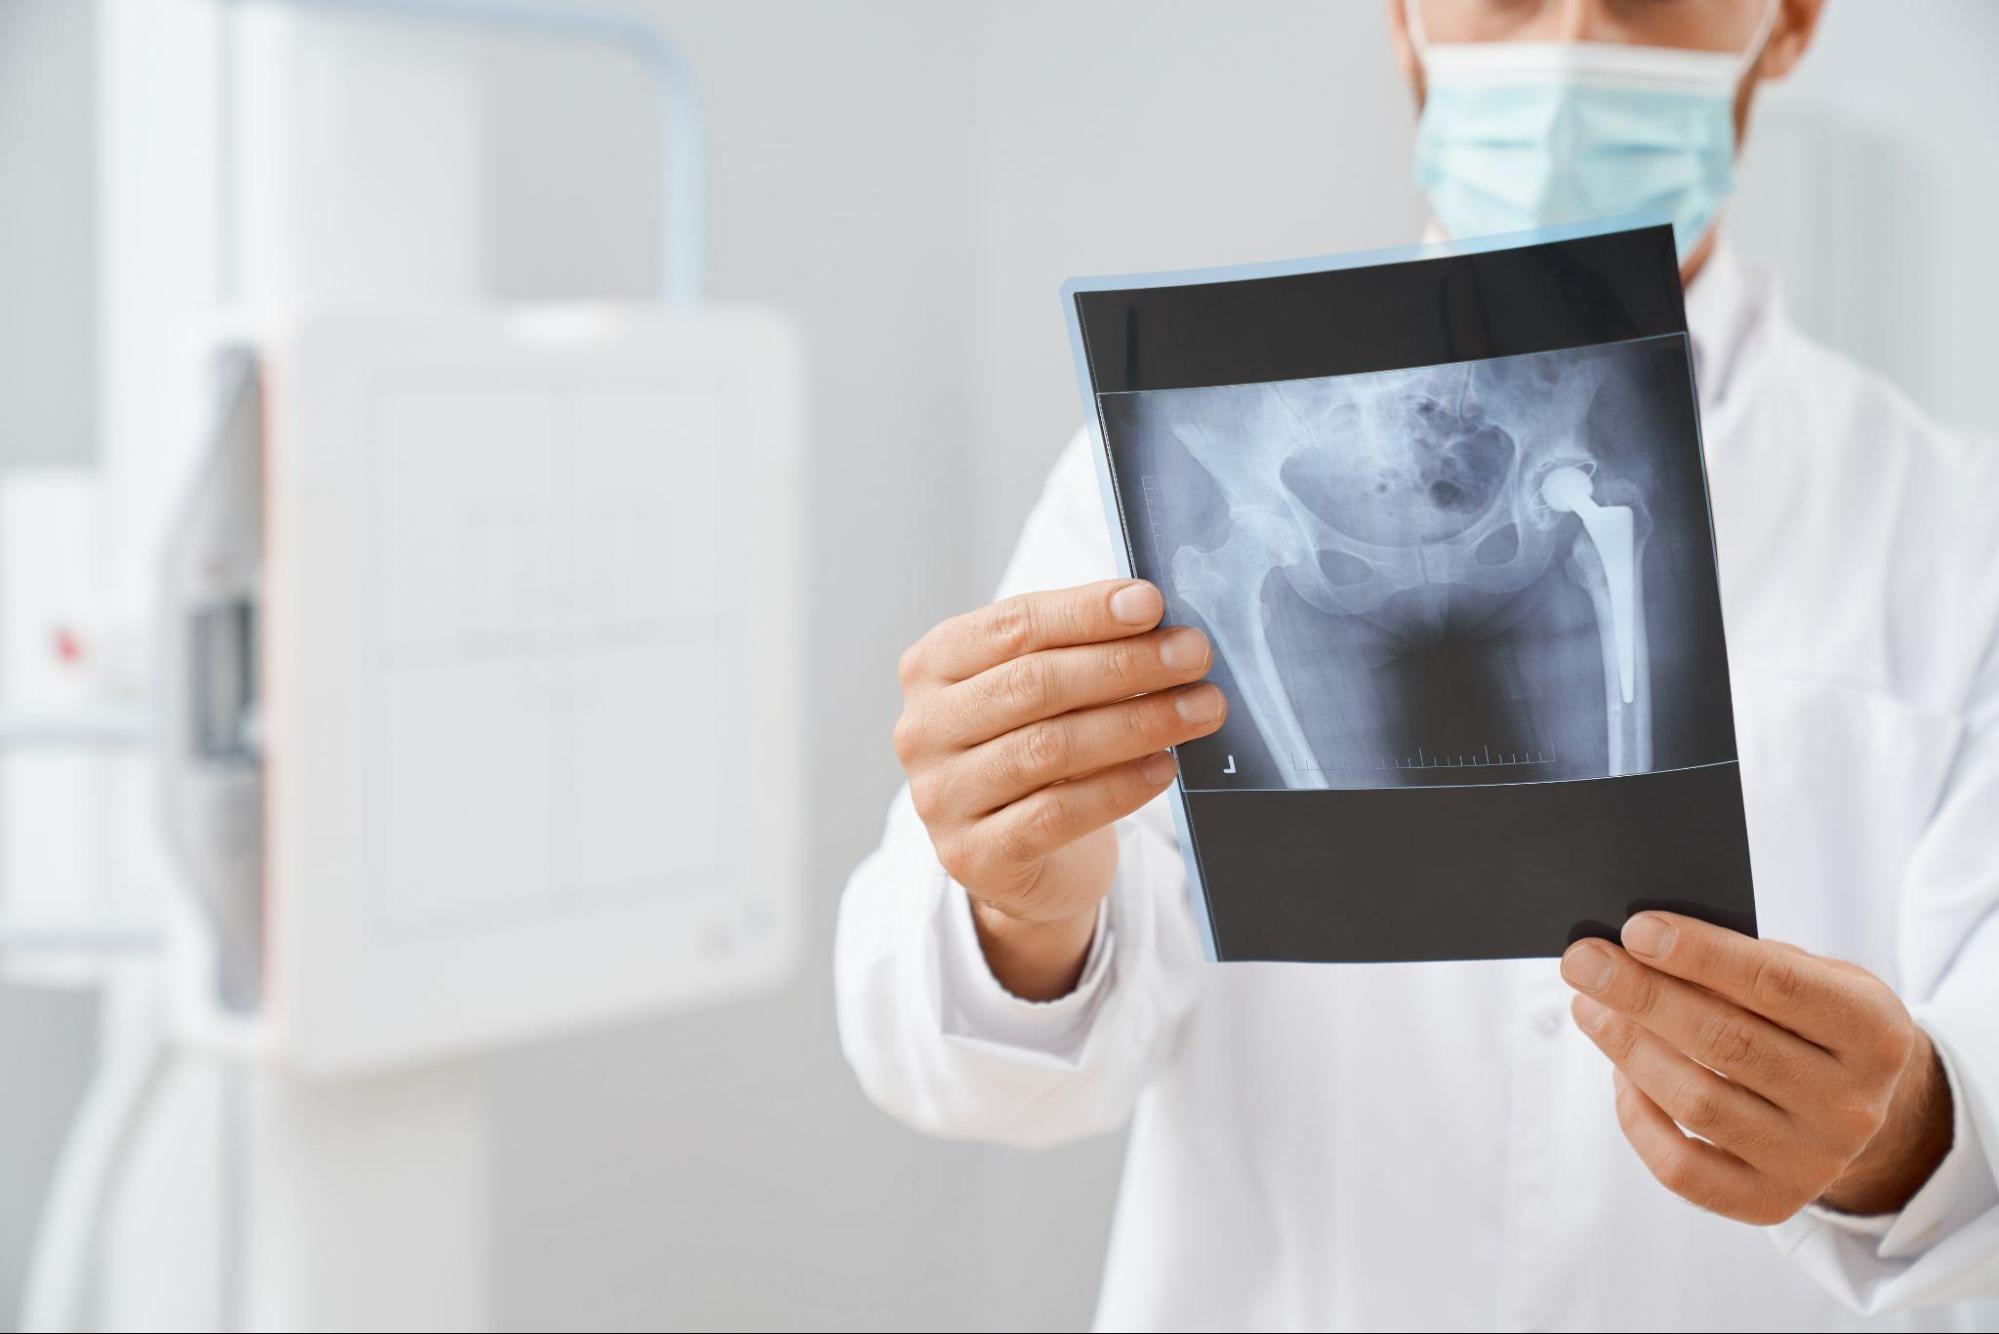 Bone Cancer: Bone Ache. When Should I Be Worried and Get It Checked?